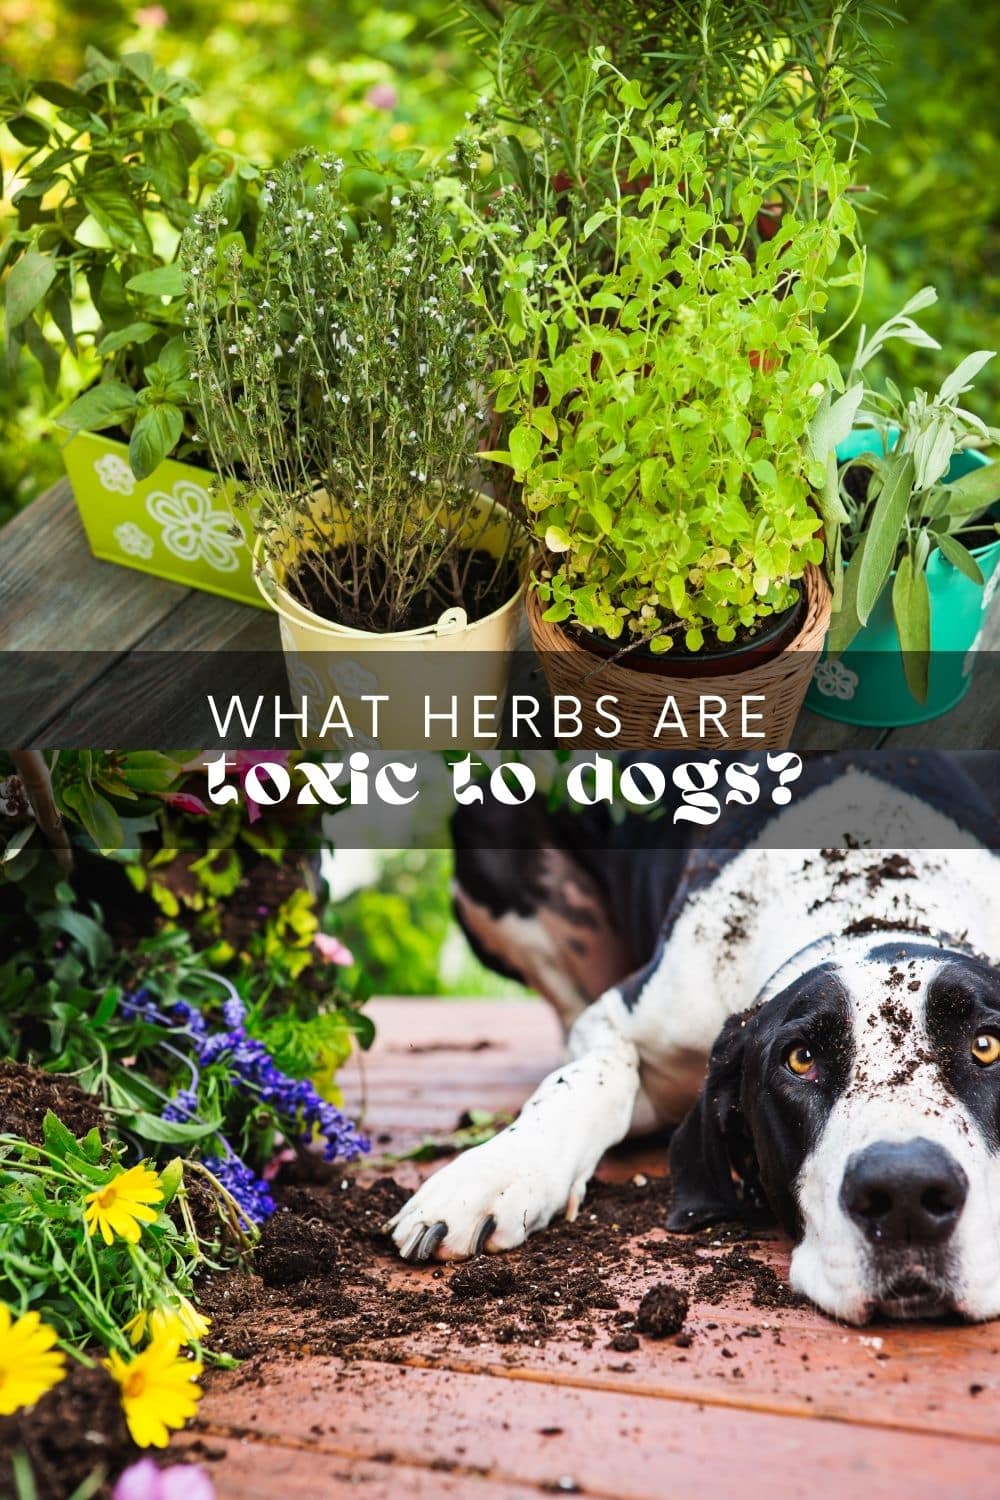 Dogs are more than just pets; they’re part of the family. As such, it's important to keep them safe and healthy. Letting your furry friend finish your dinner leftovers may be tempting, but it's not always the best idea. Some herbs and spices we regularly use to flavor our meals can actually be toxic to dogs!